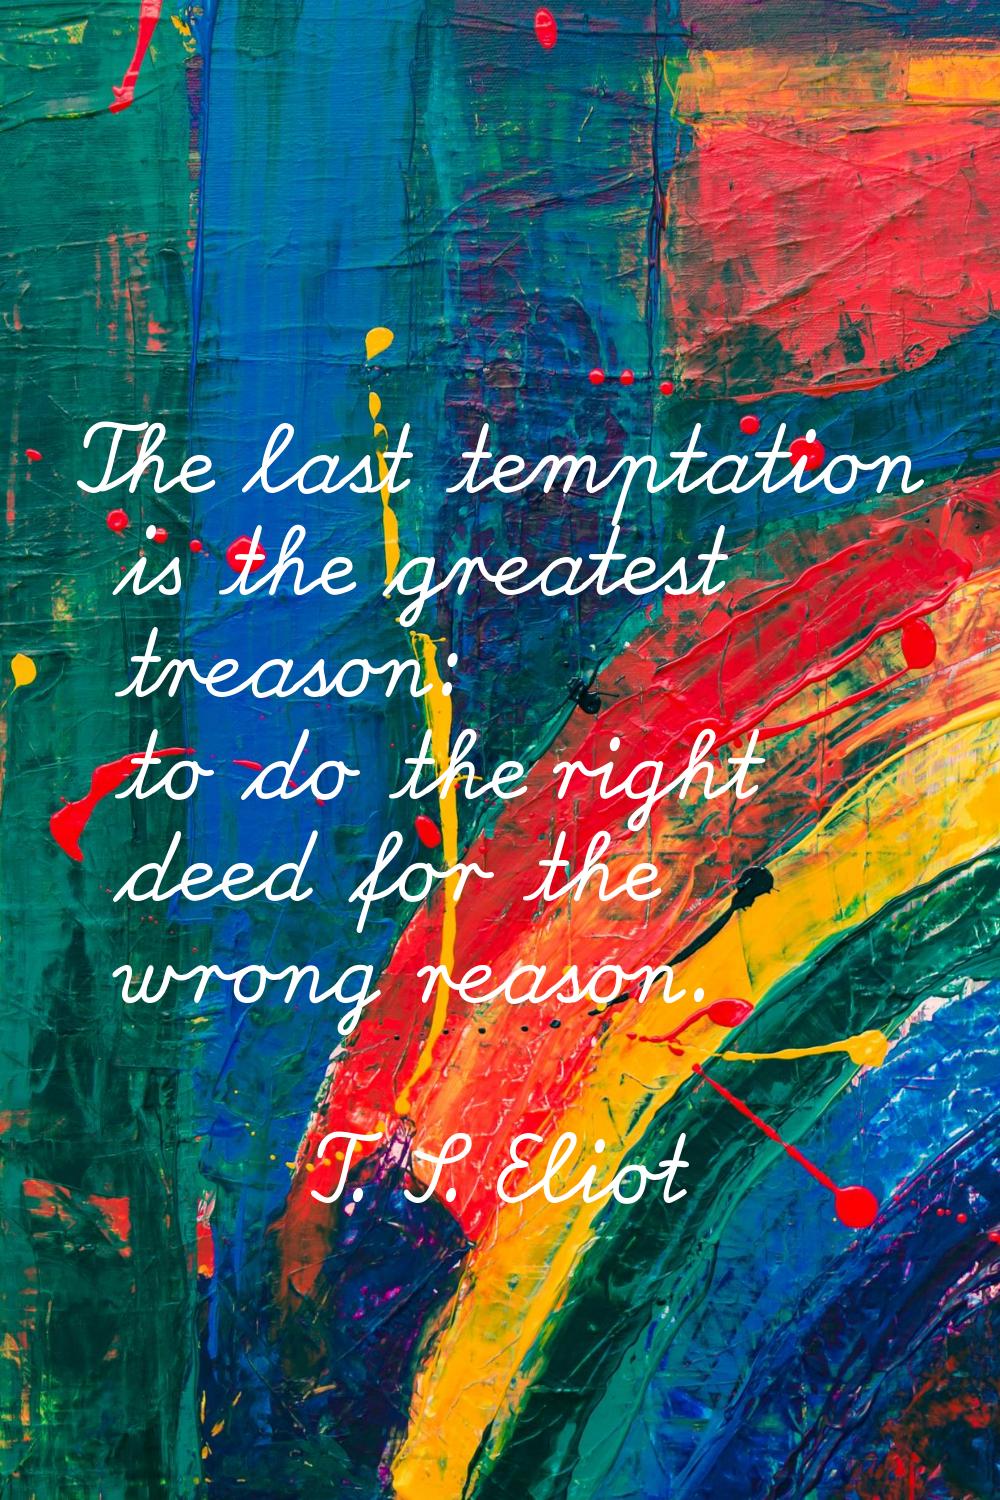 The last temptation is the greatest treason: to do the right deed for the wrong reason.